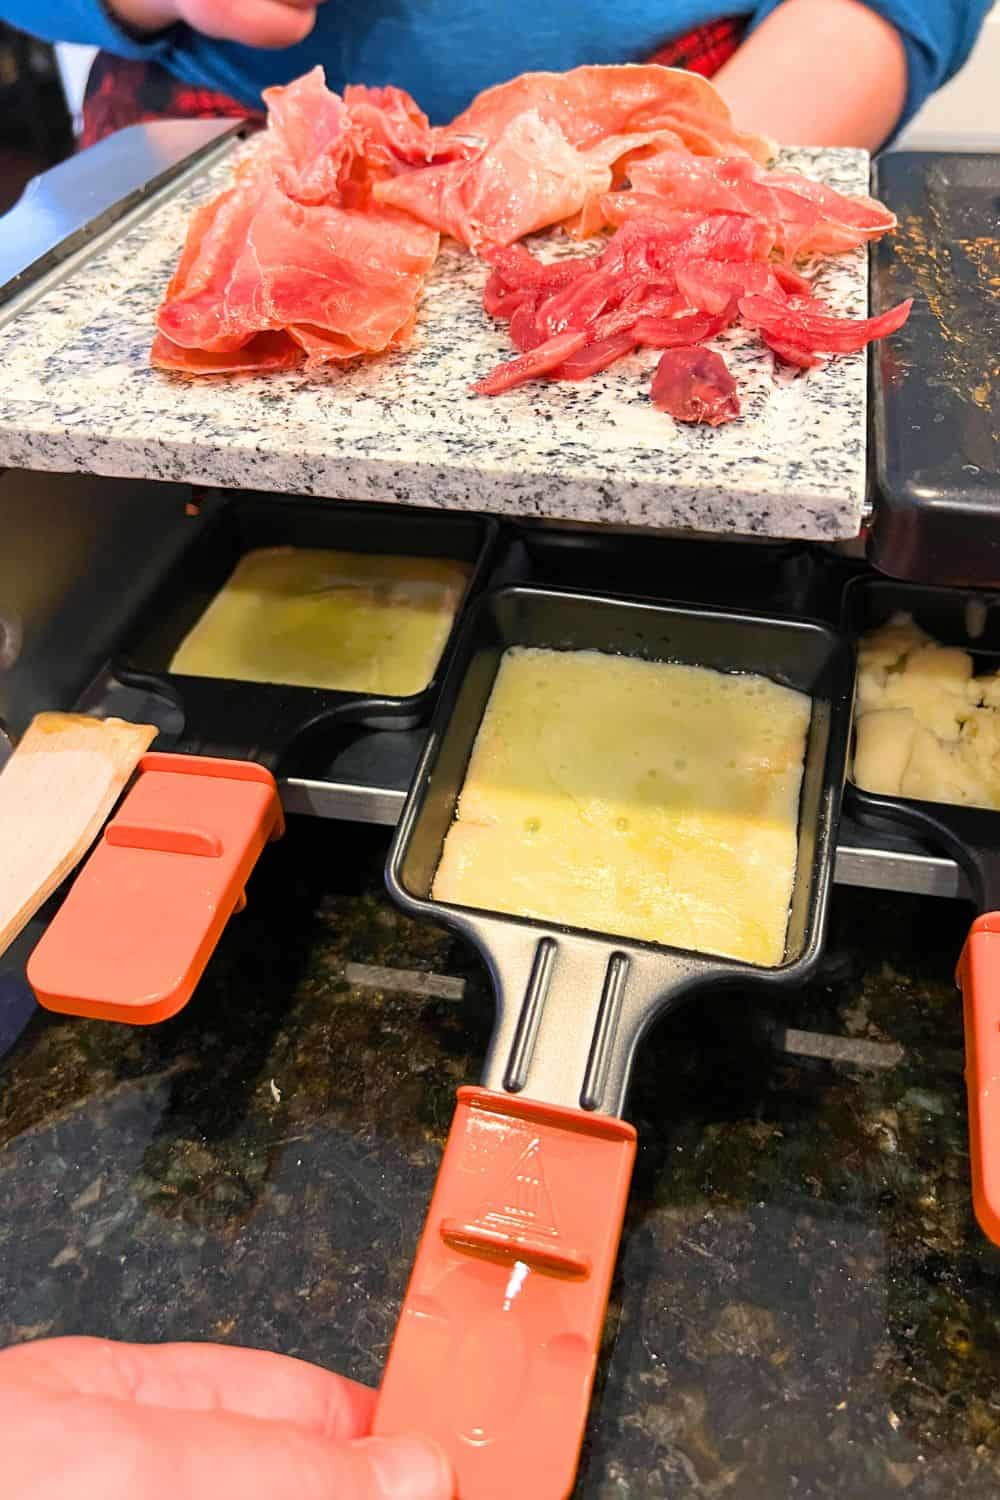 What is a raclette maker - home raclette grill on counter with prosciutto on grill top and melting raclette in trays under the grill